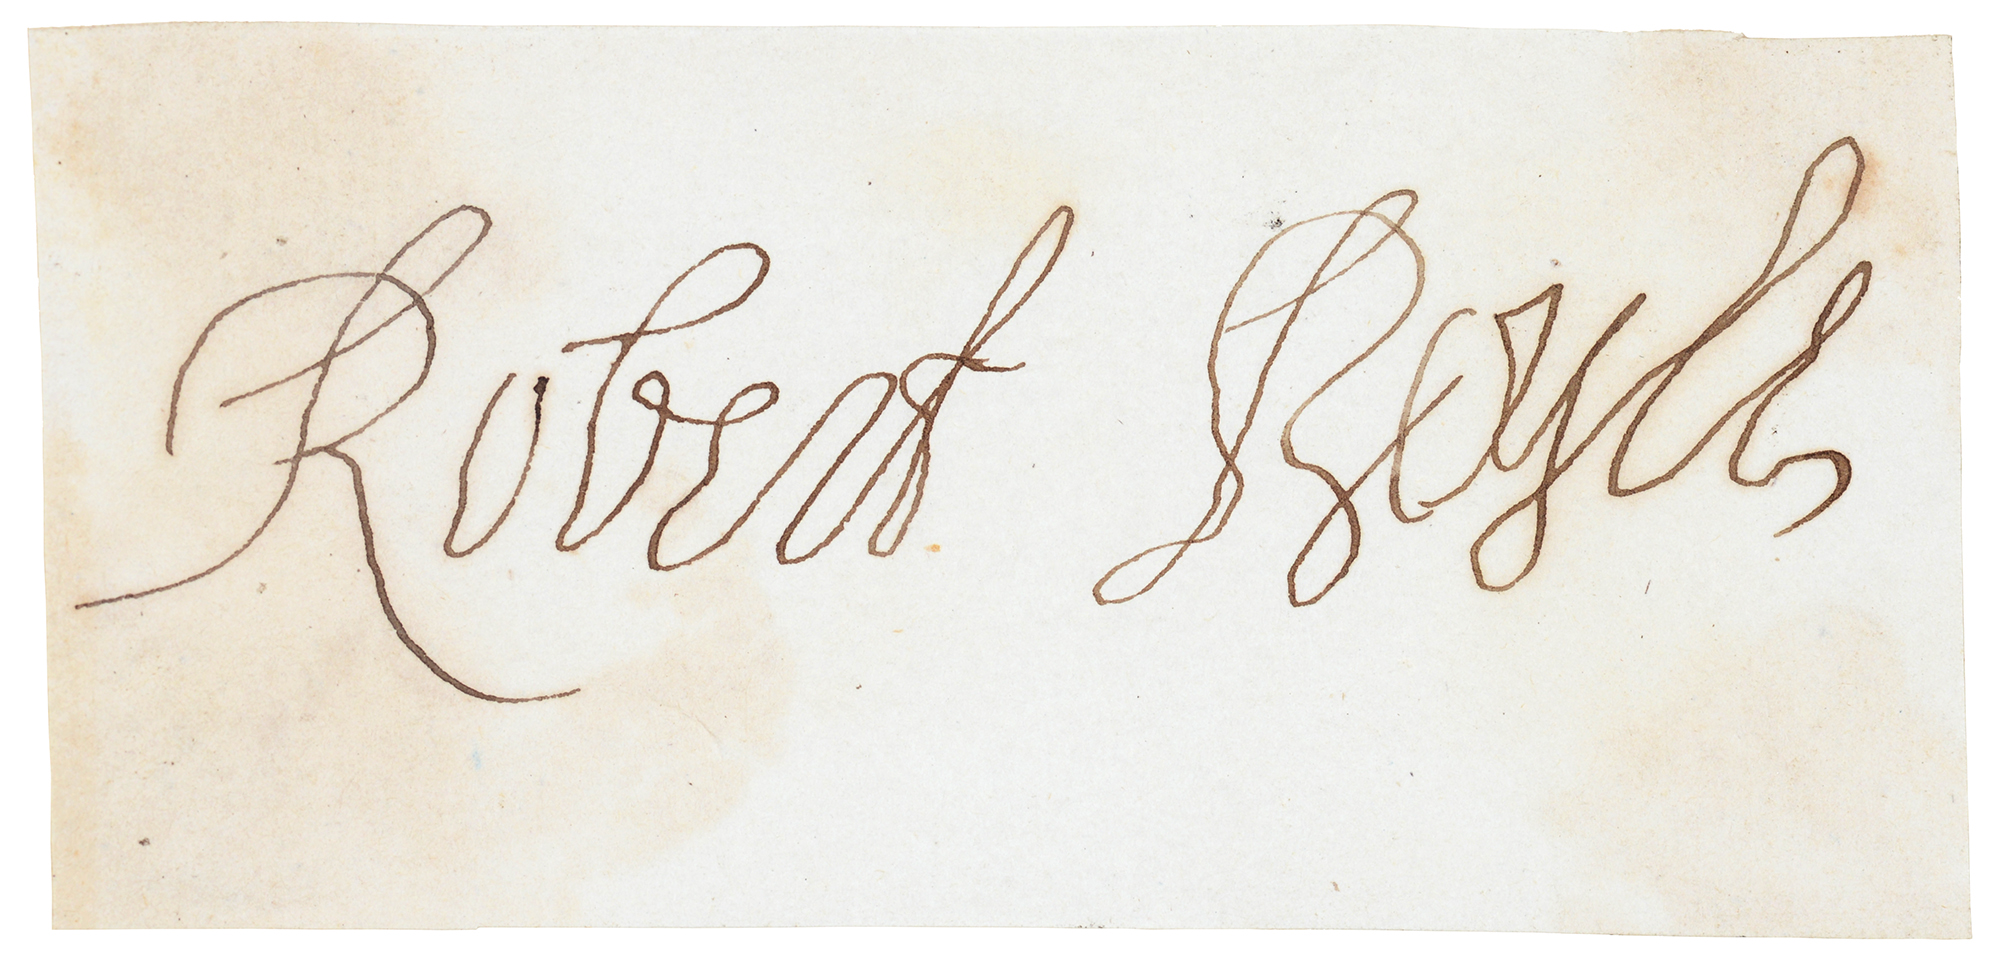 ROBERT BOYLE, FRS (1627-1691) PIECE SIGNED IN INK ROBERT BOYLE  c4.5 x 9.6cm, laid down on an